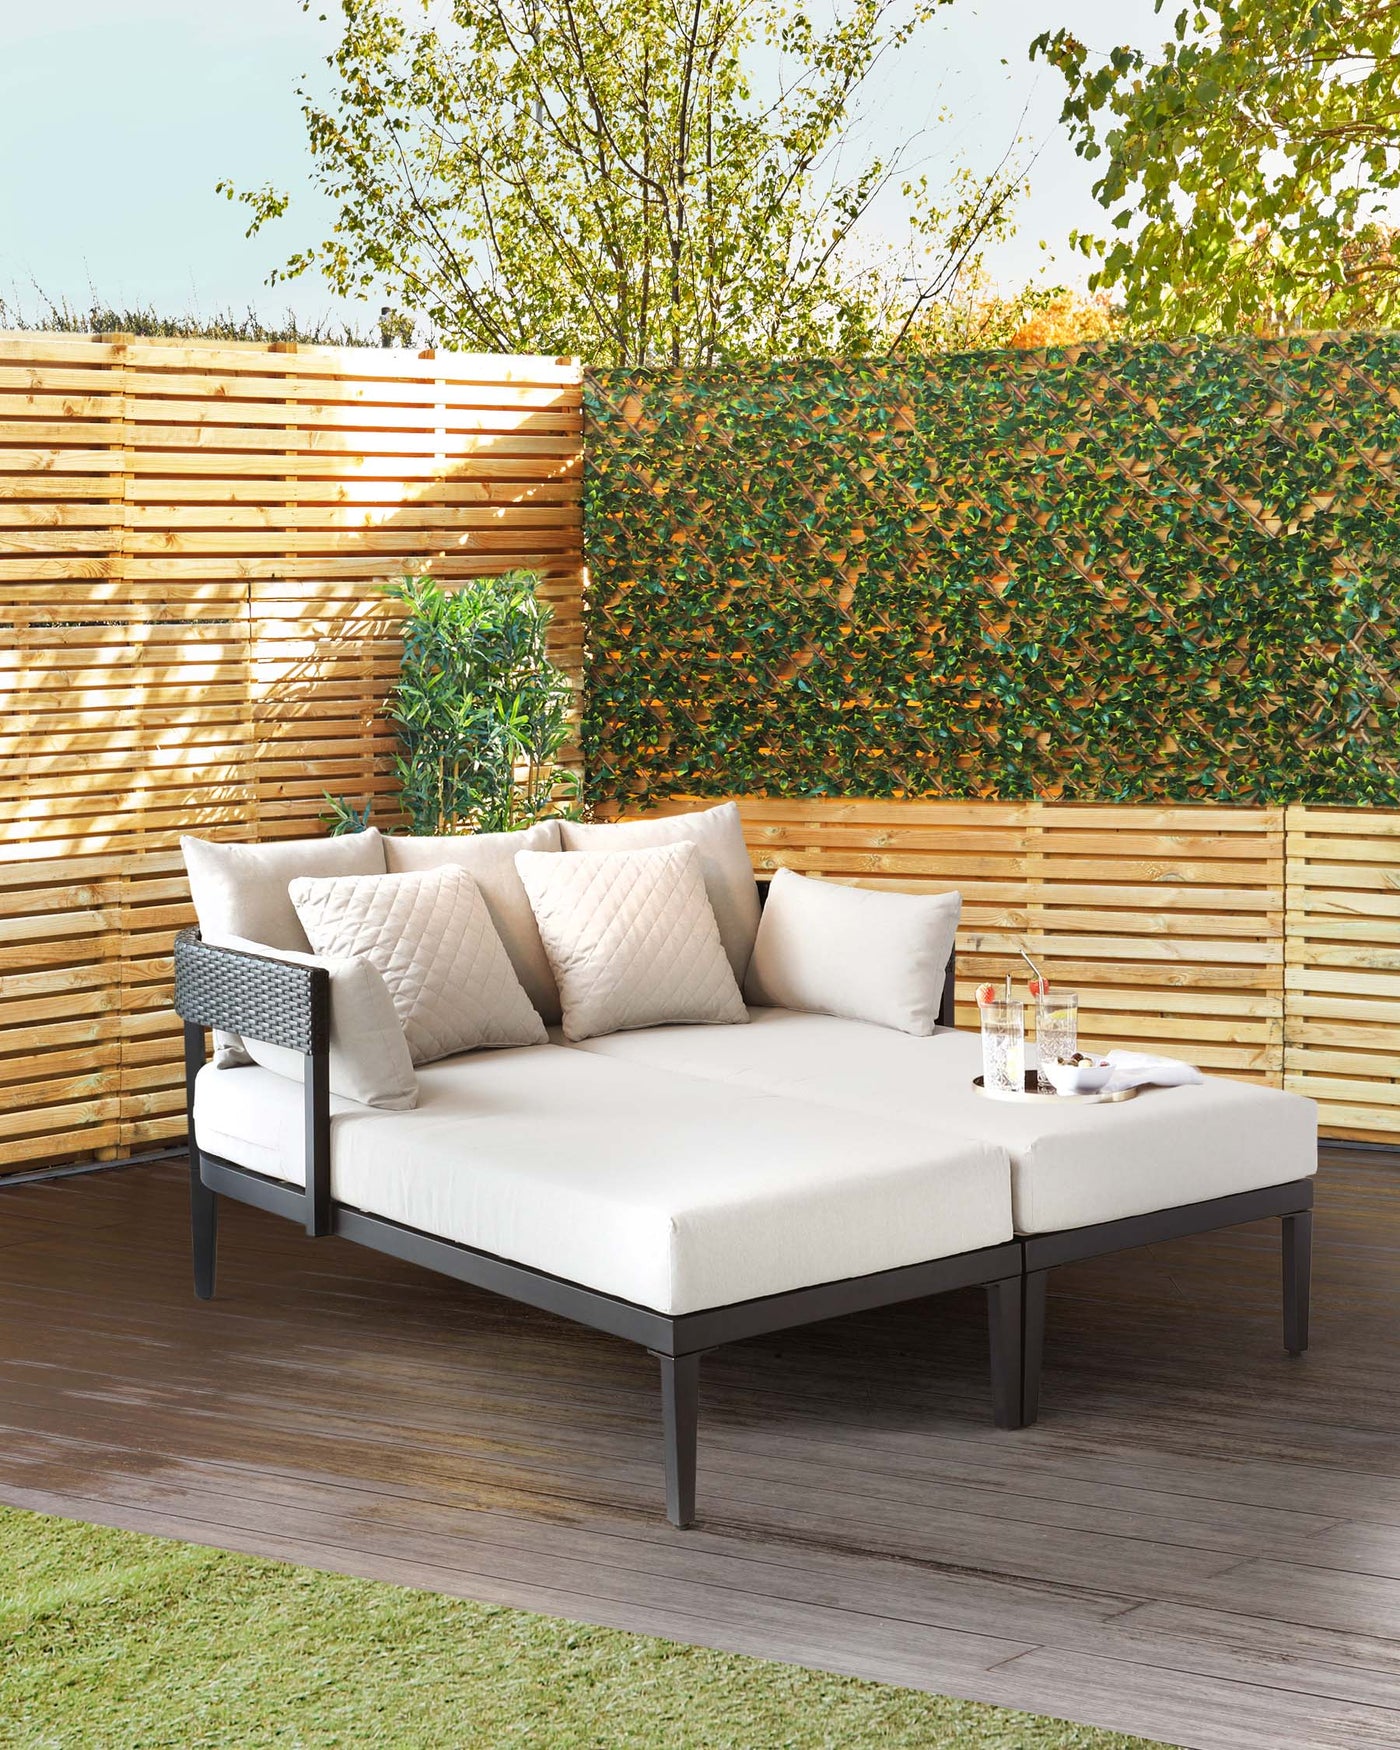 Outdoor corner lounge sofa with a modern aluminium frame, deep cushioned seats, and backrest pillows, set on a wooden deck with greenery in the background.